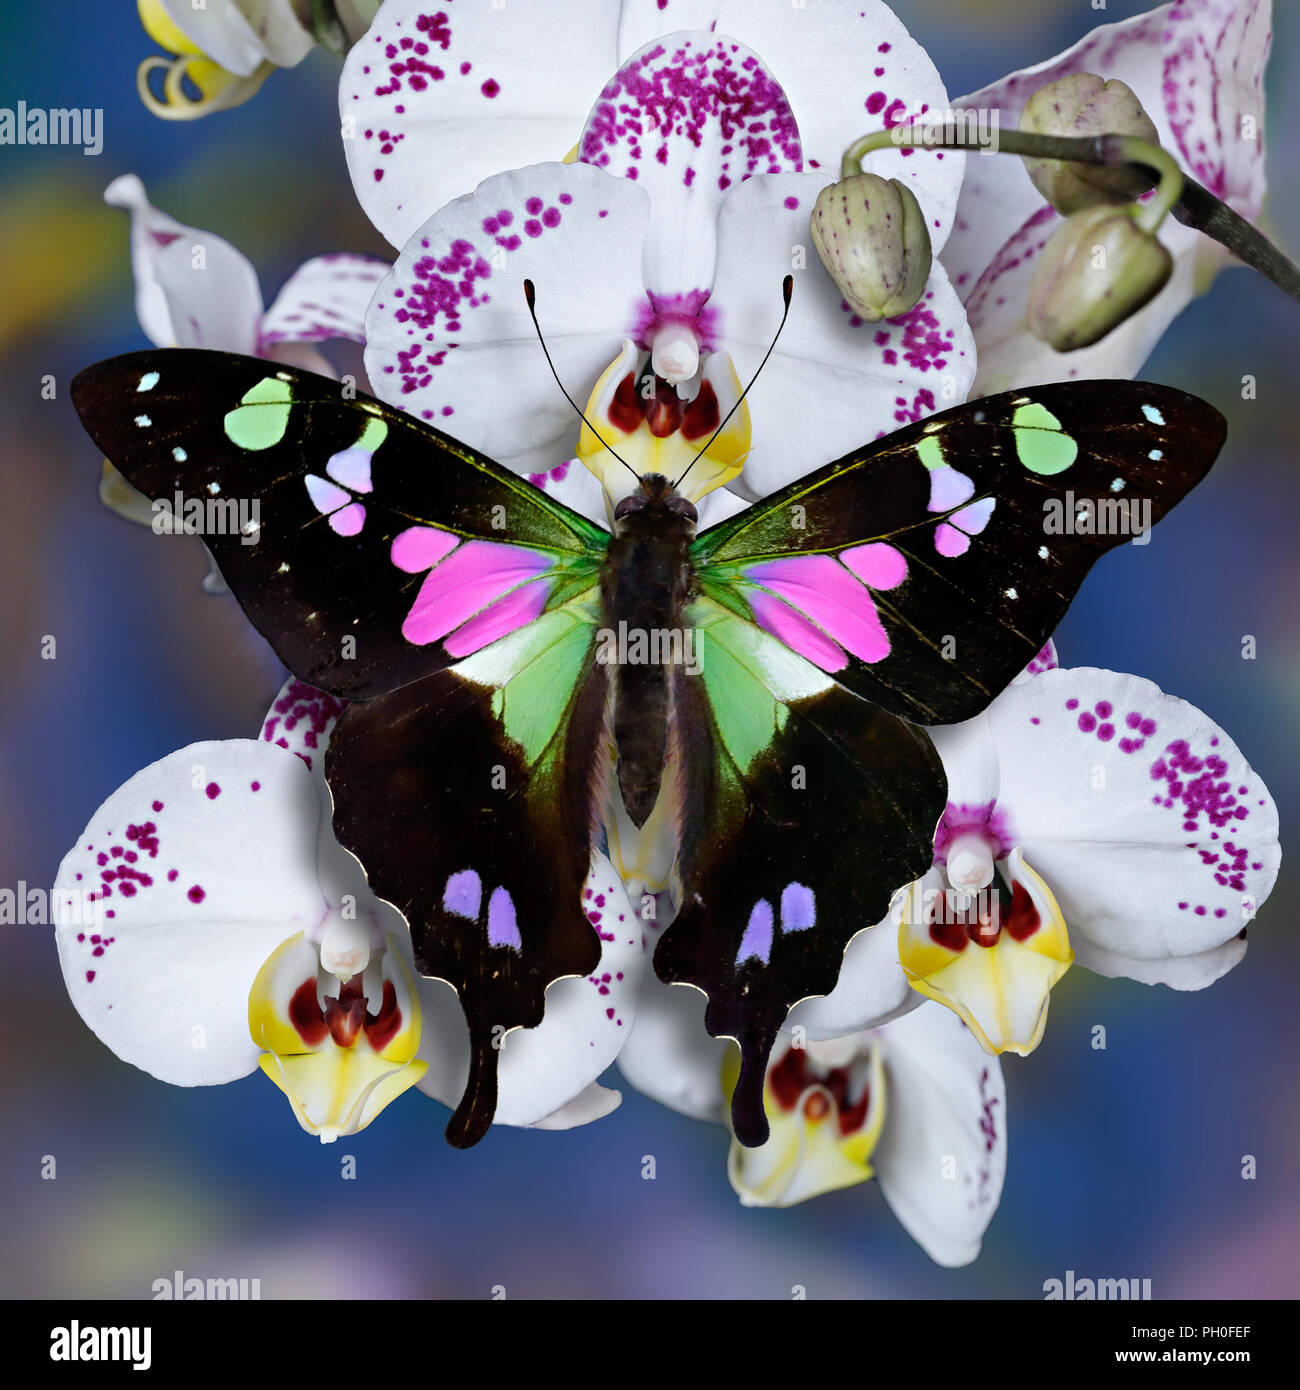 Butterfly Graphium weiskei swallowtail, Papilionidae, on white orchid flowers with blurred blue background Stock Photo